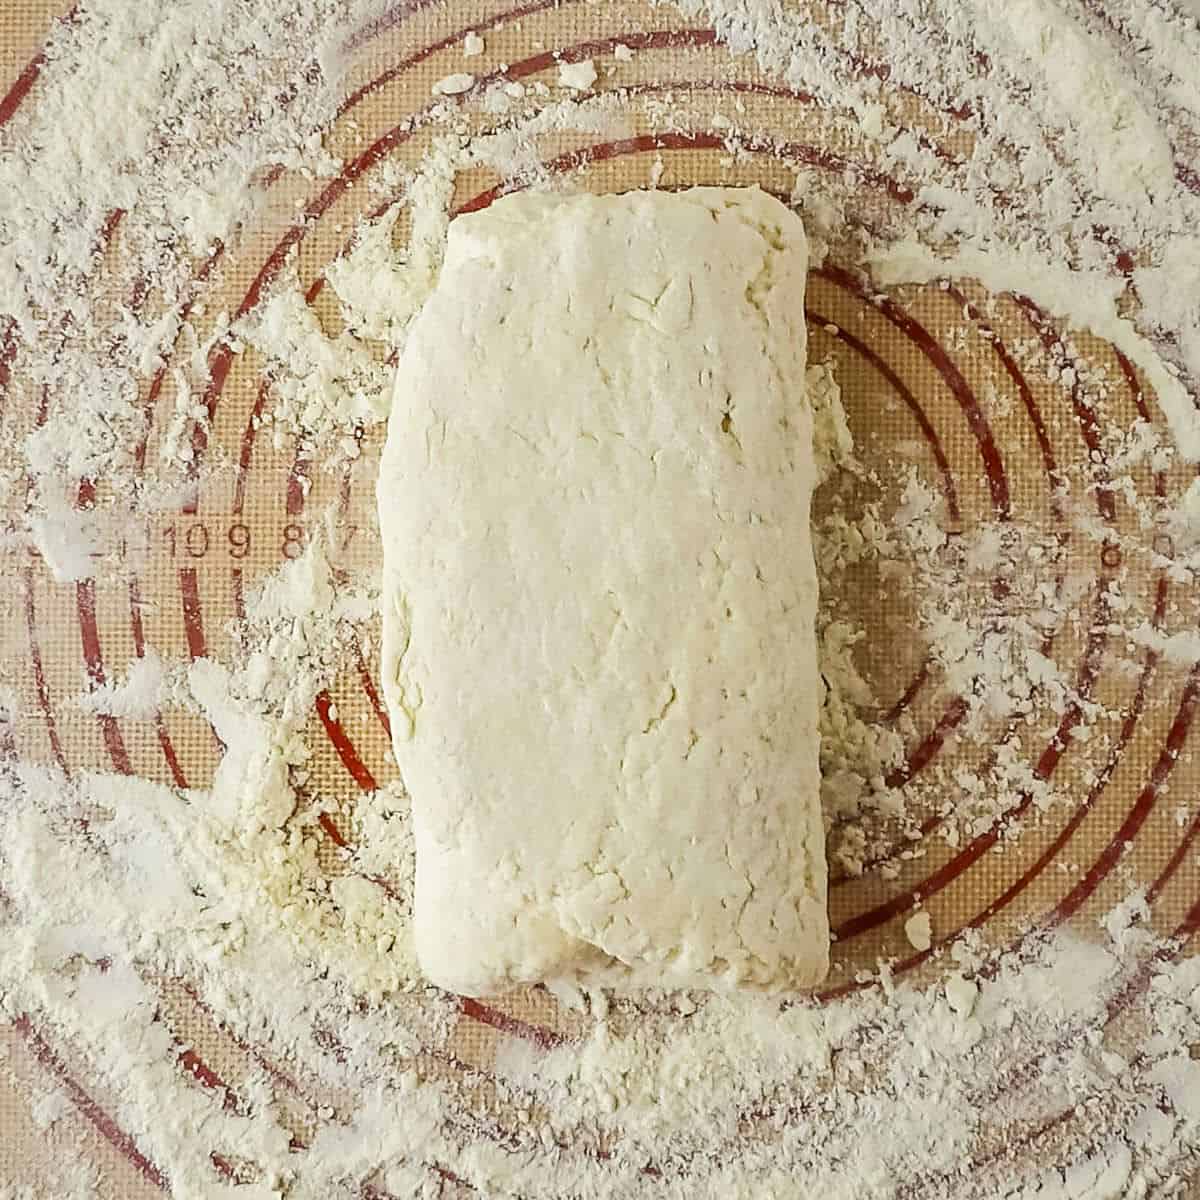 Buttermilk biscuit dough being tri-folded to create flaky layers.